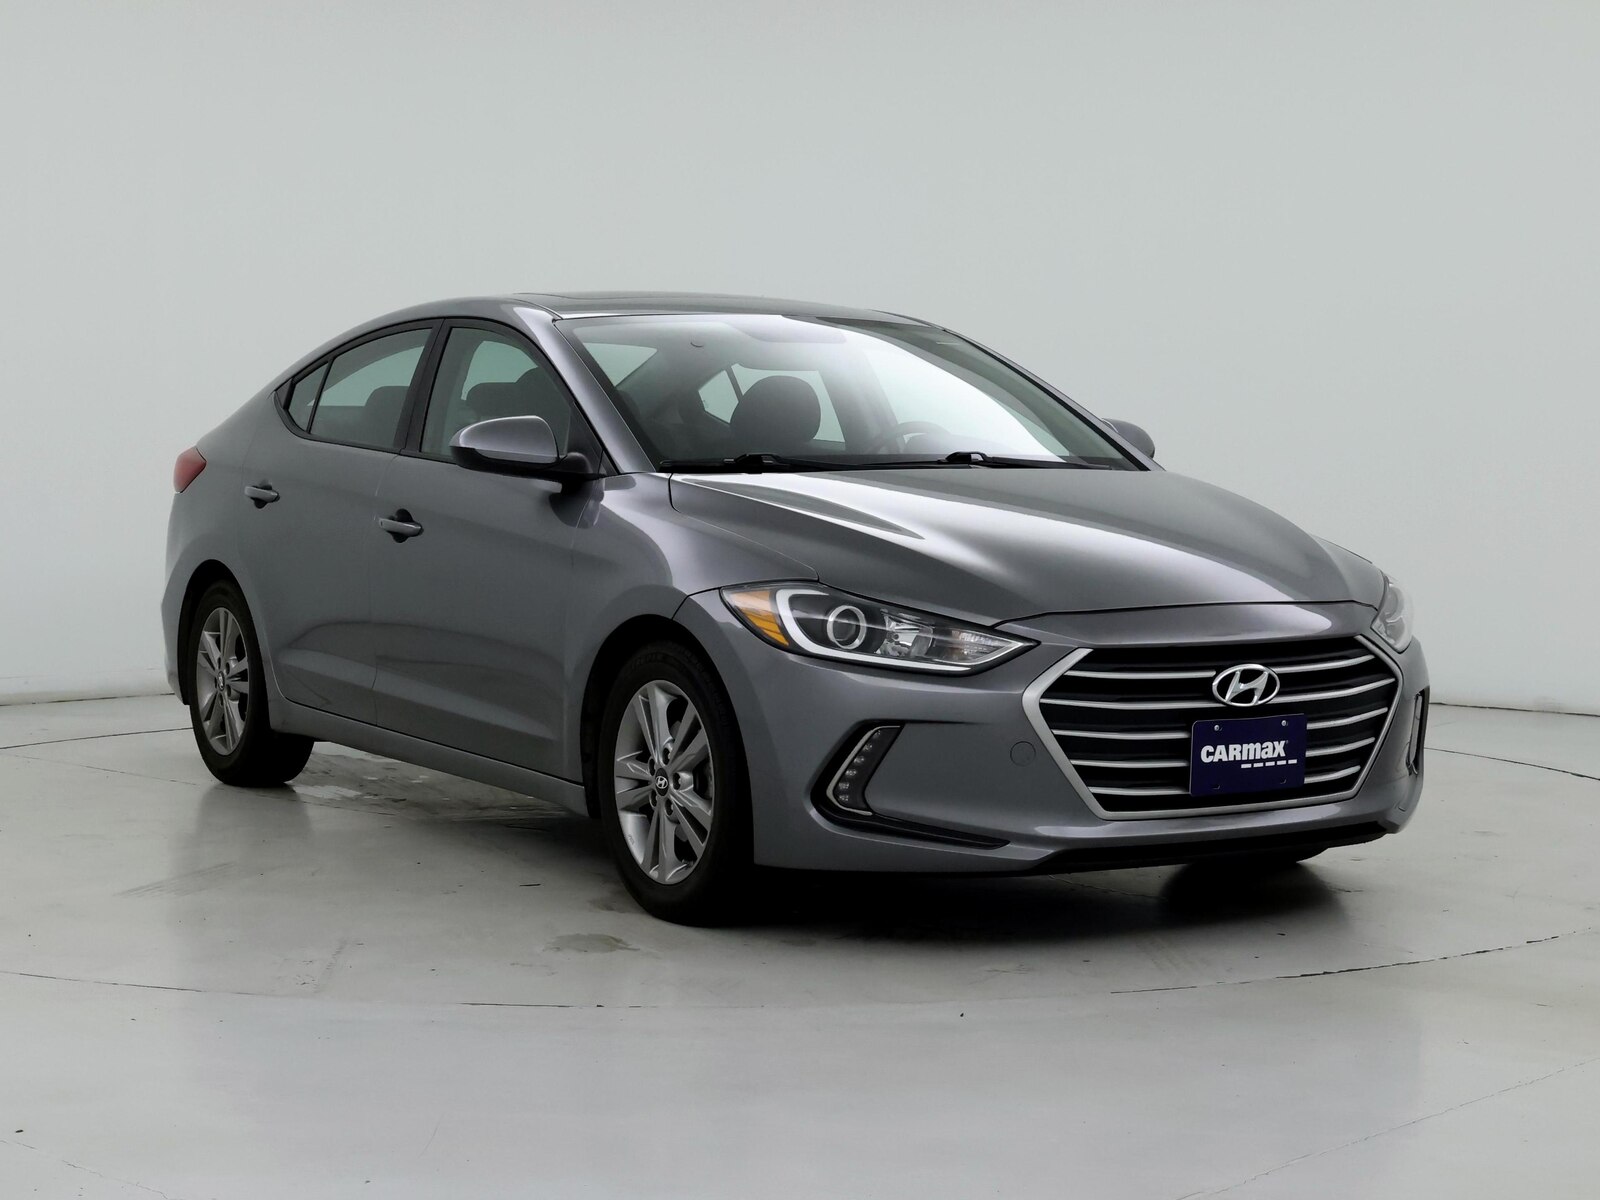 Used 2017 Hyundai Elantra Value Edition with VIN KMHD84LF7HU255407 for sale in Spokane Valley, WA